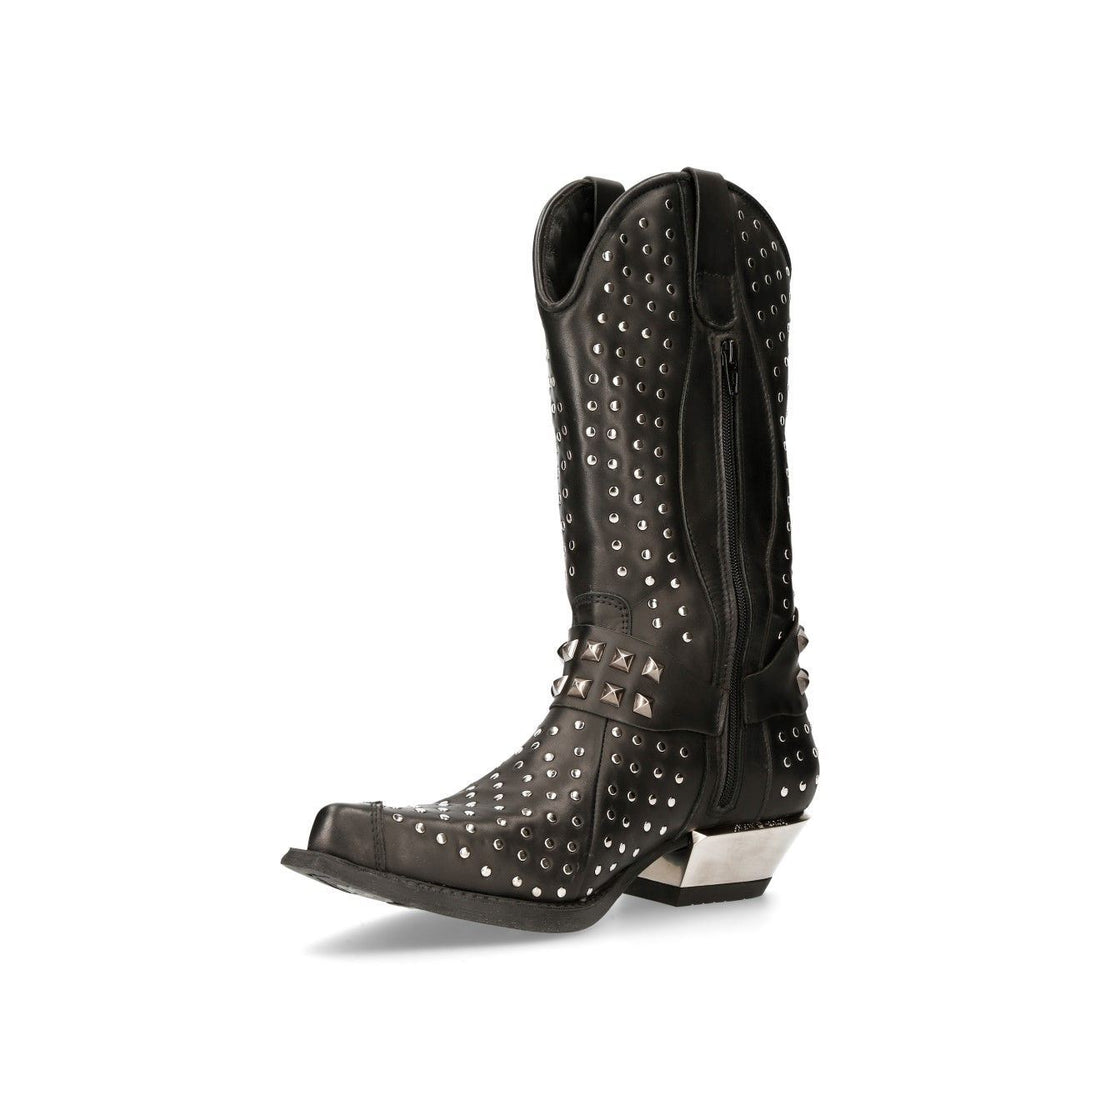 New Rock Black Leather Studded Cowboy Boots- M-7928-S1 - Upperclass Fashions 